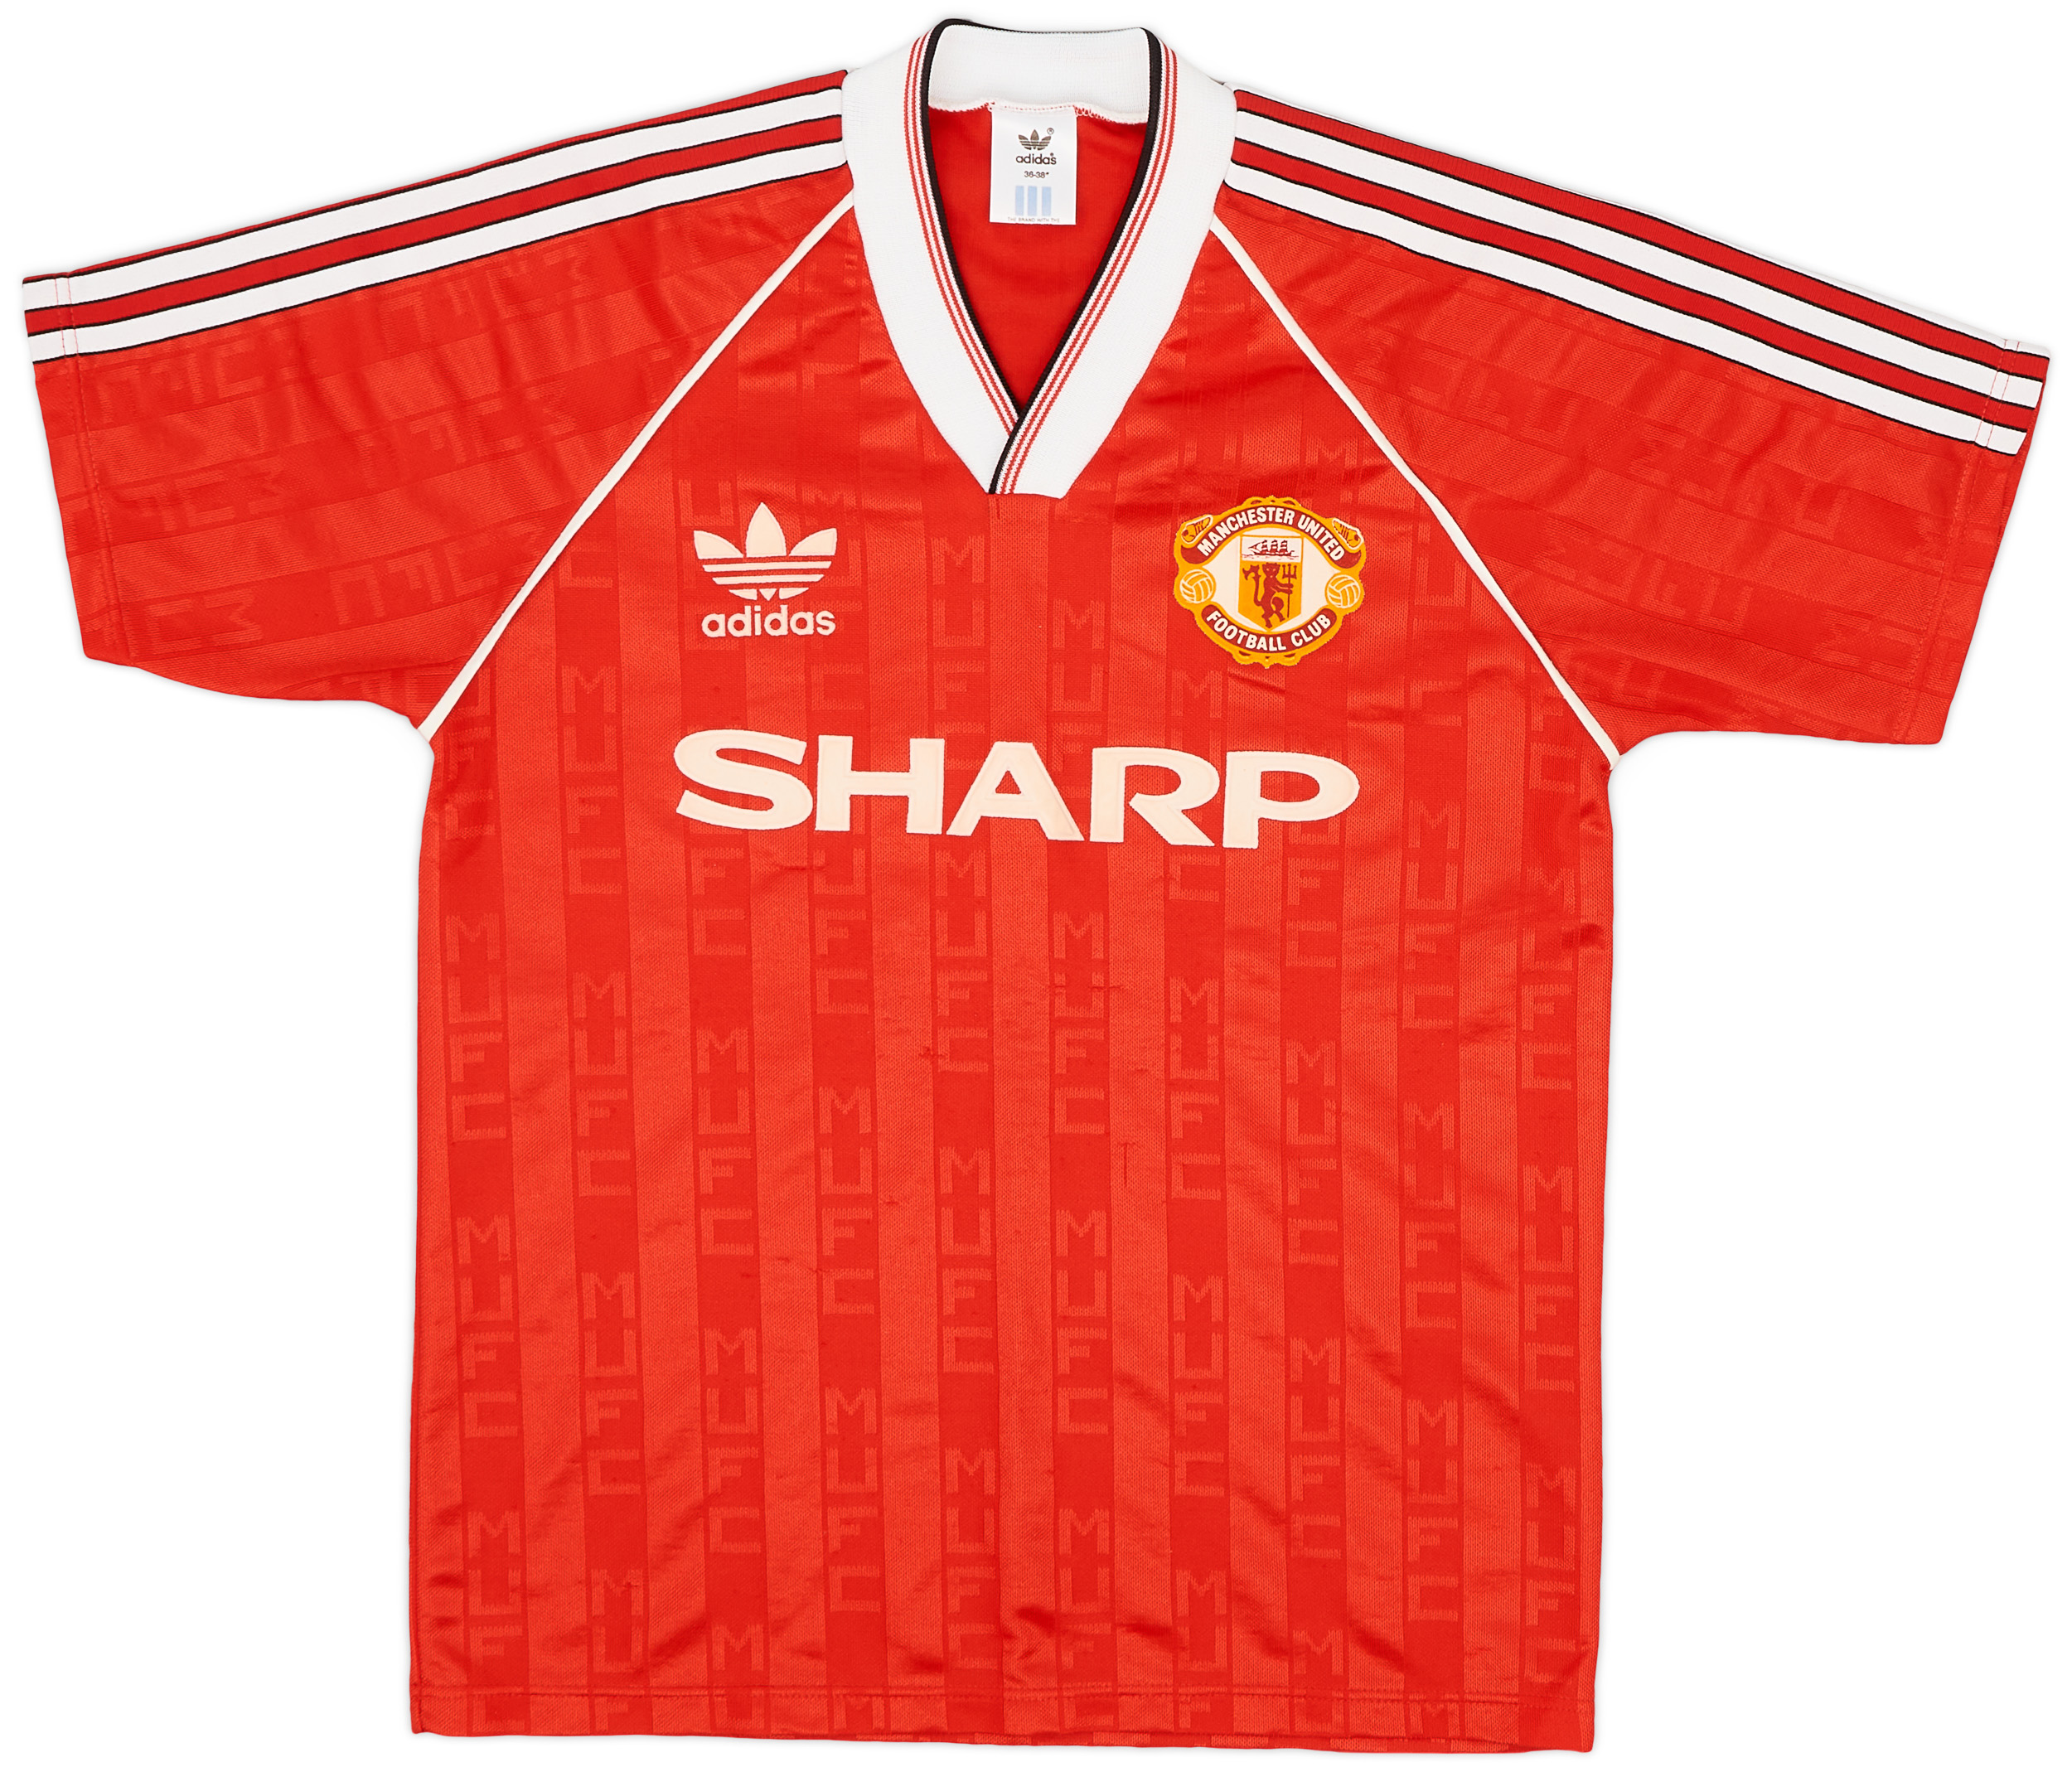 1988-90 Manchester United Home Shirt - 7/10 - ()